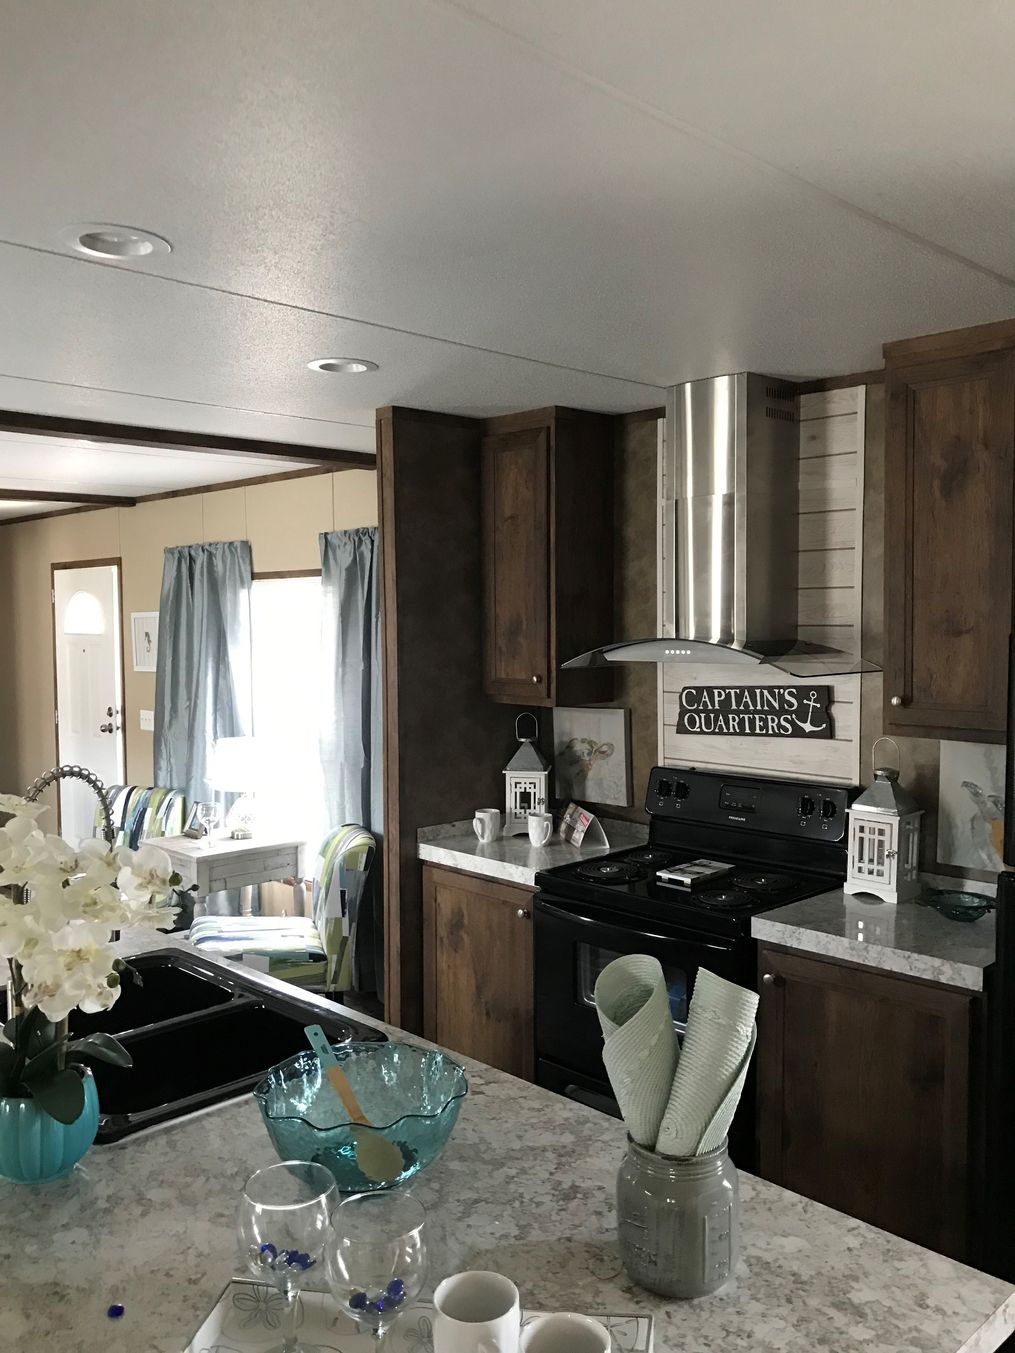 The THE ANNIVERSARY SPLASH Kitchen. This Manufactured Mobile Home features 3 bedrooms and 2 baths.